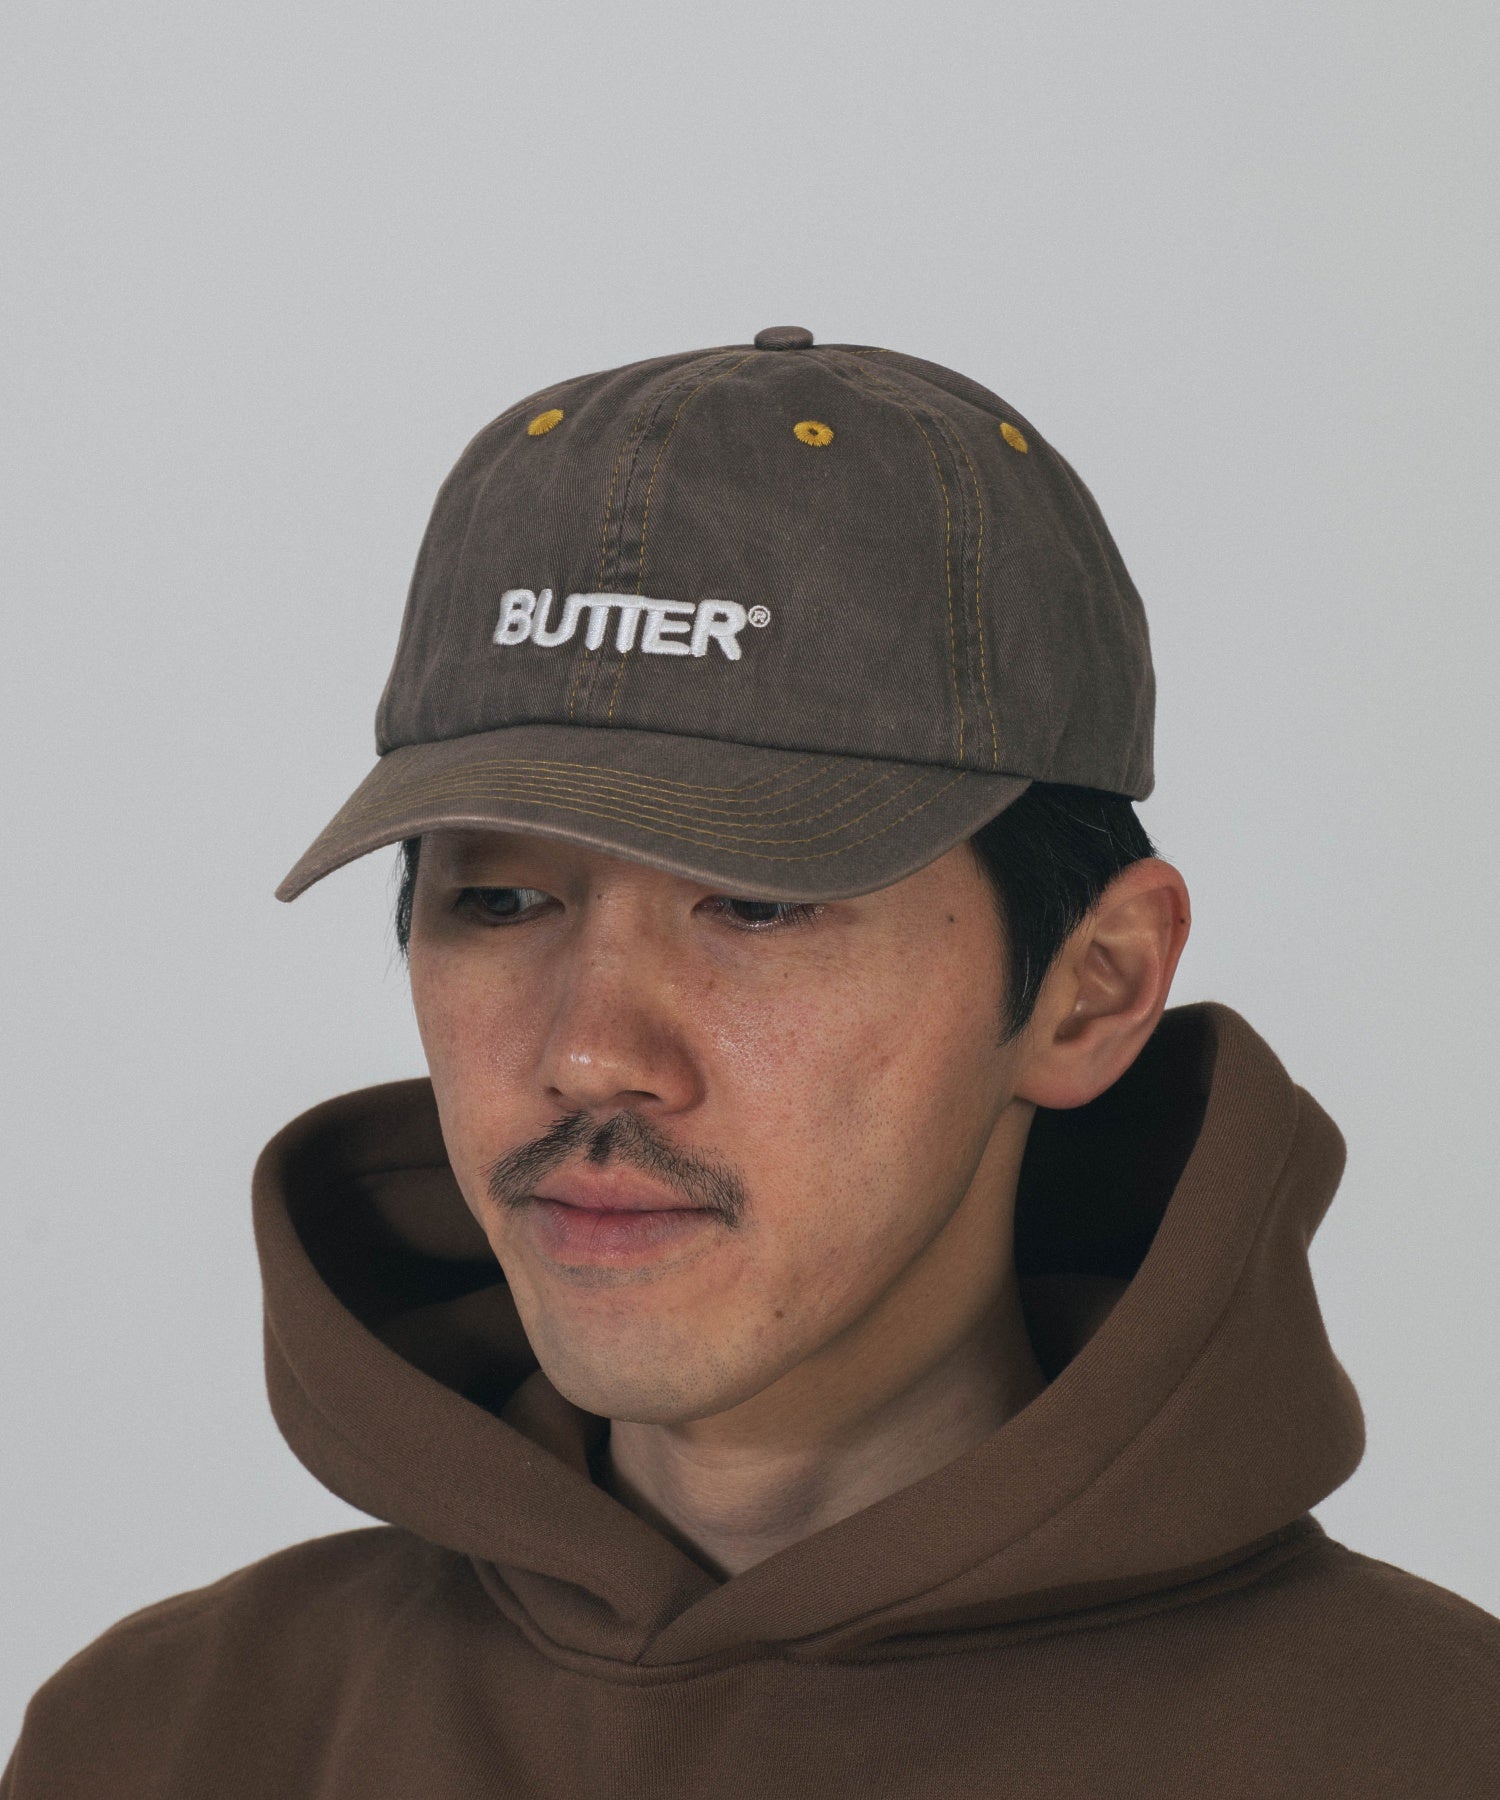 BUTTER/バター/Rounded Logo 6 Panel Cap